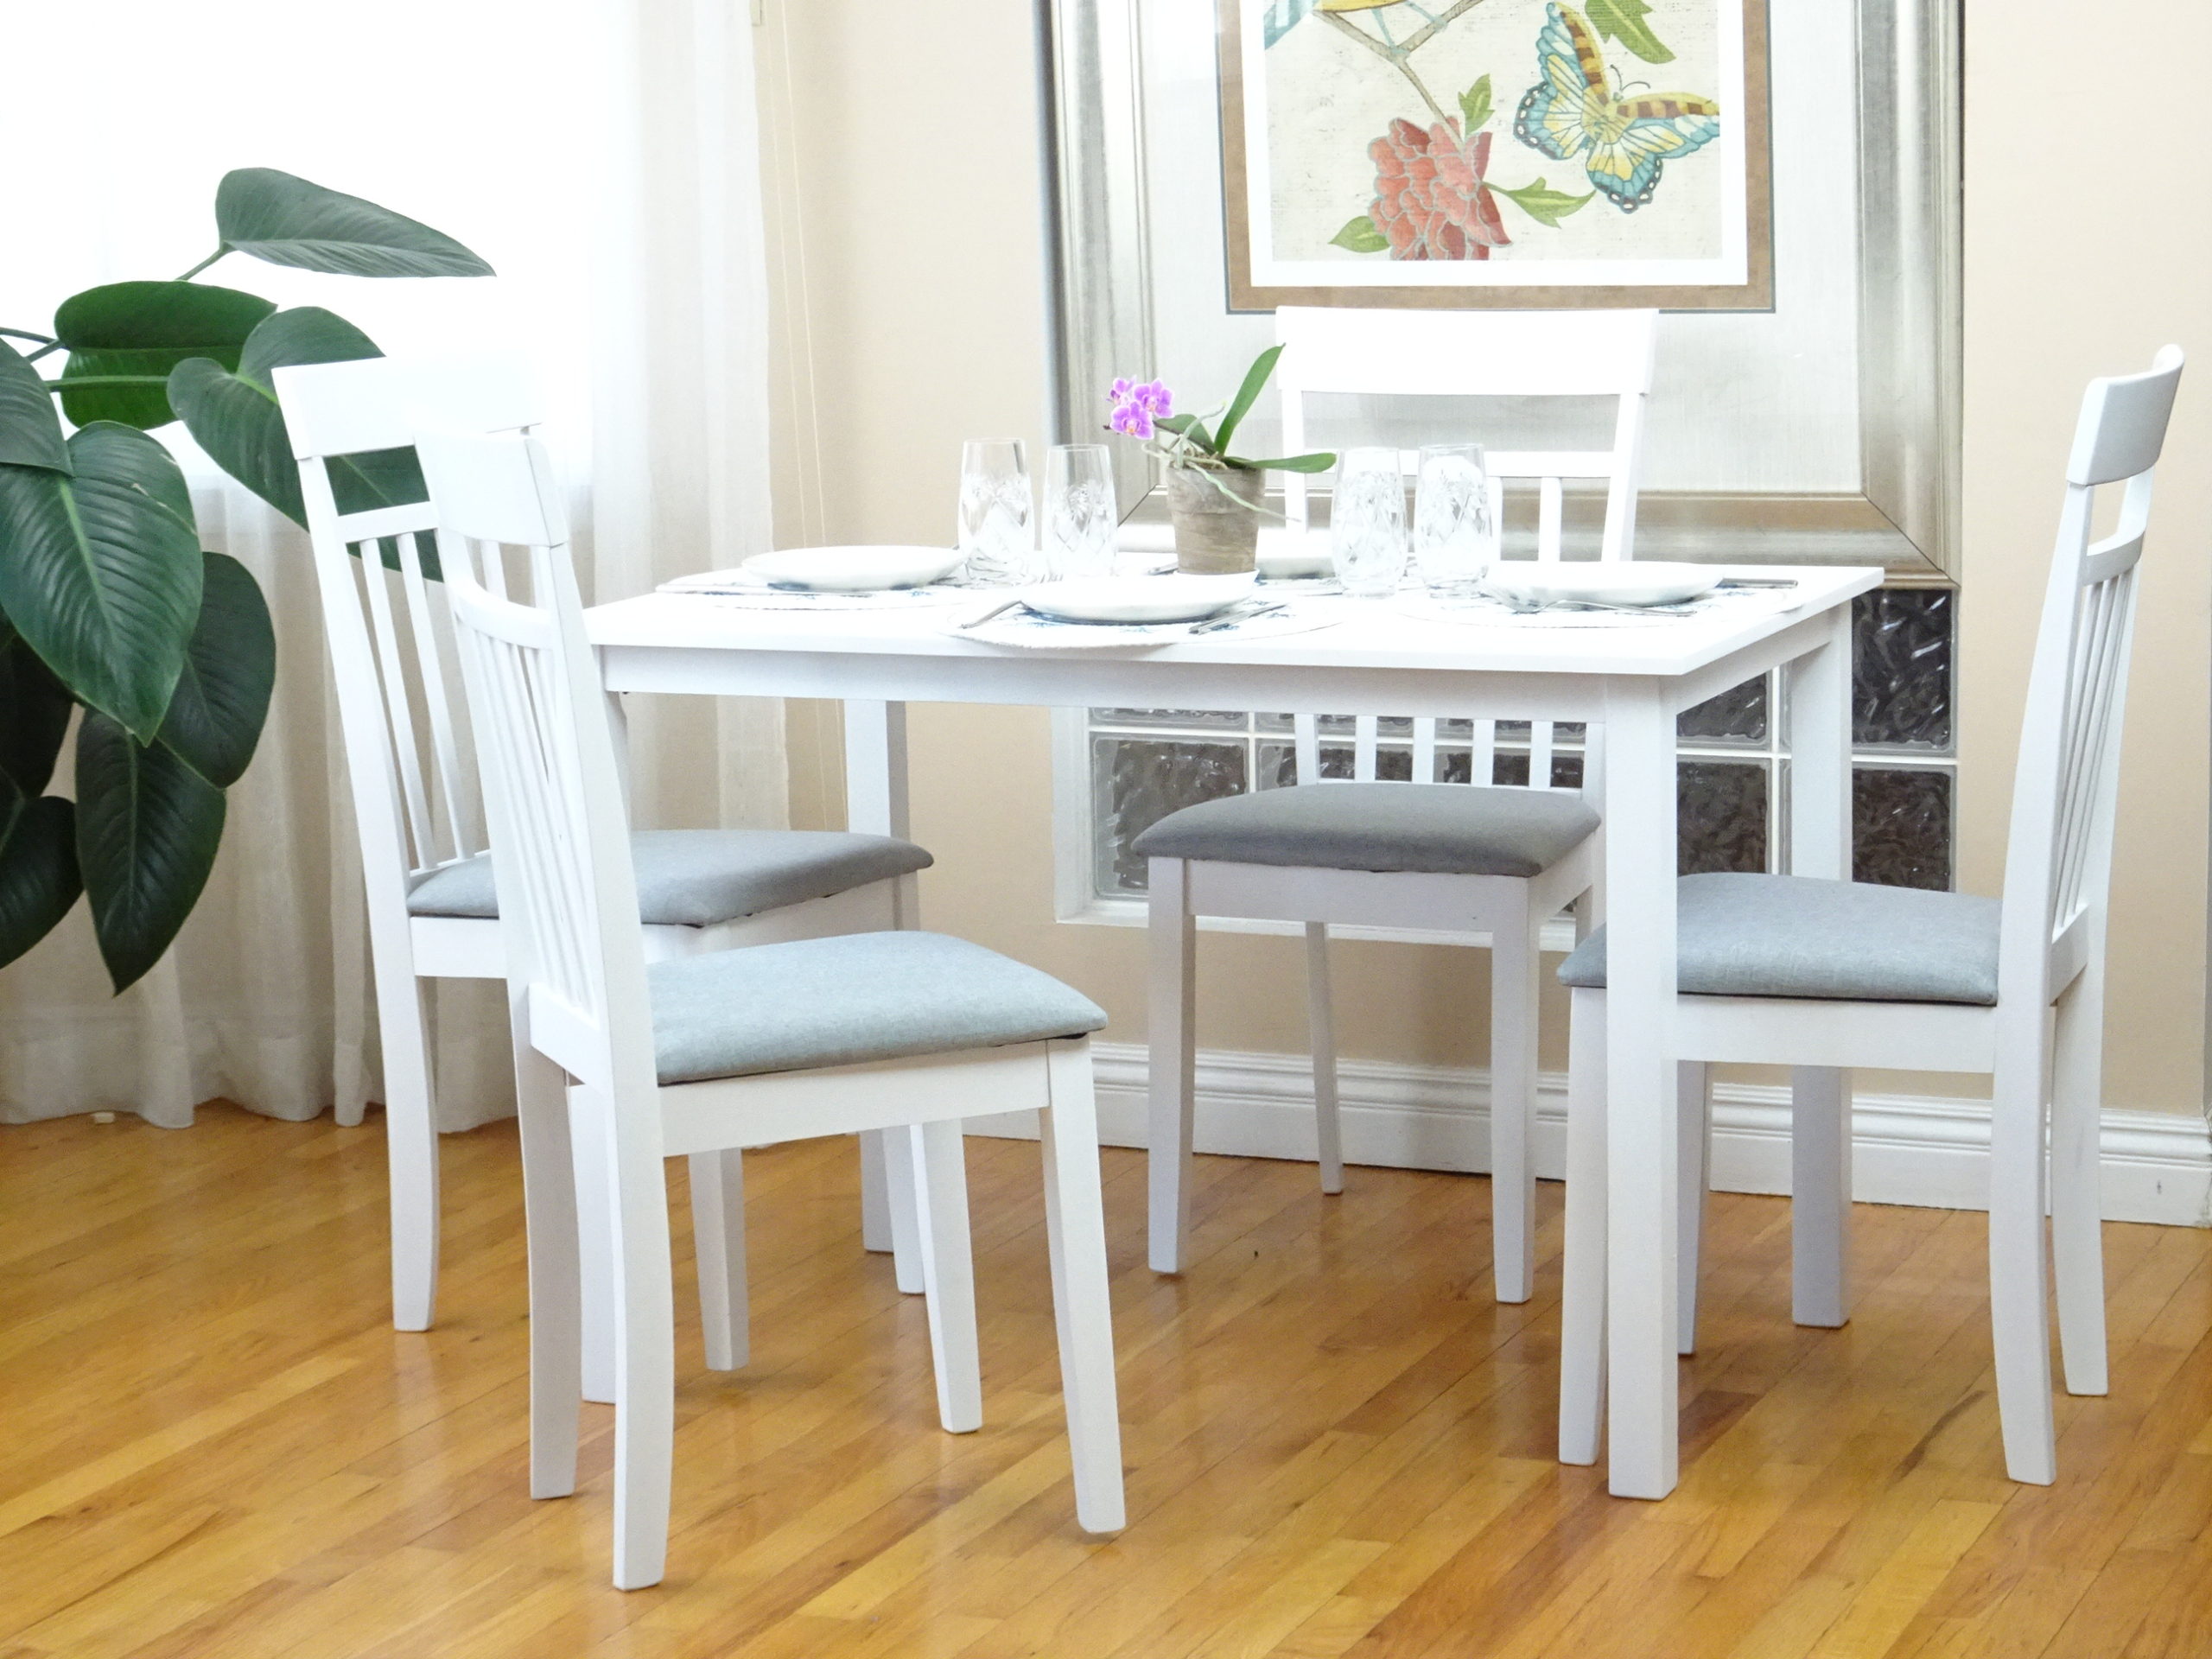 Buy Dining Set of Rectangular Table and 4 Warm Chairs in White Finish ...